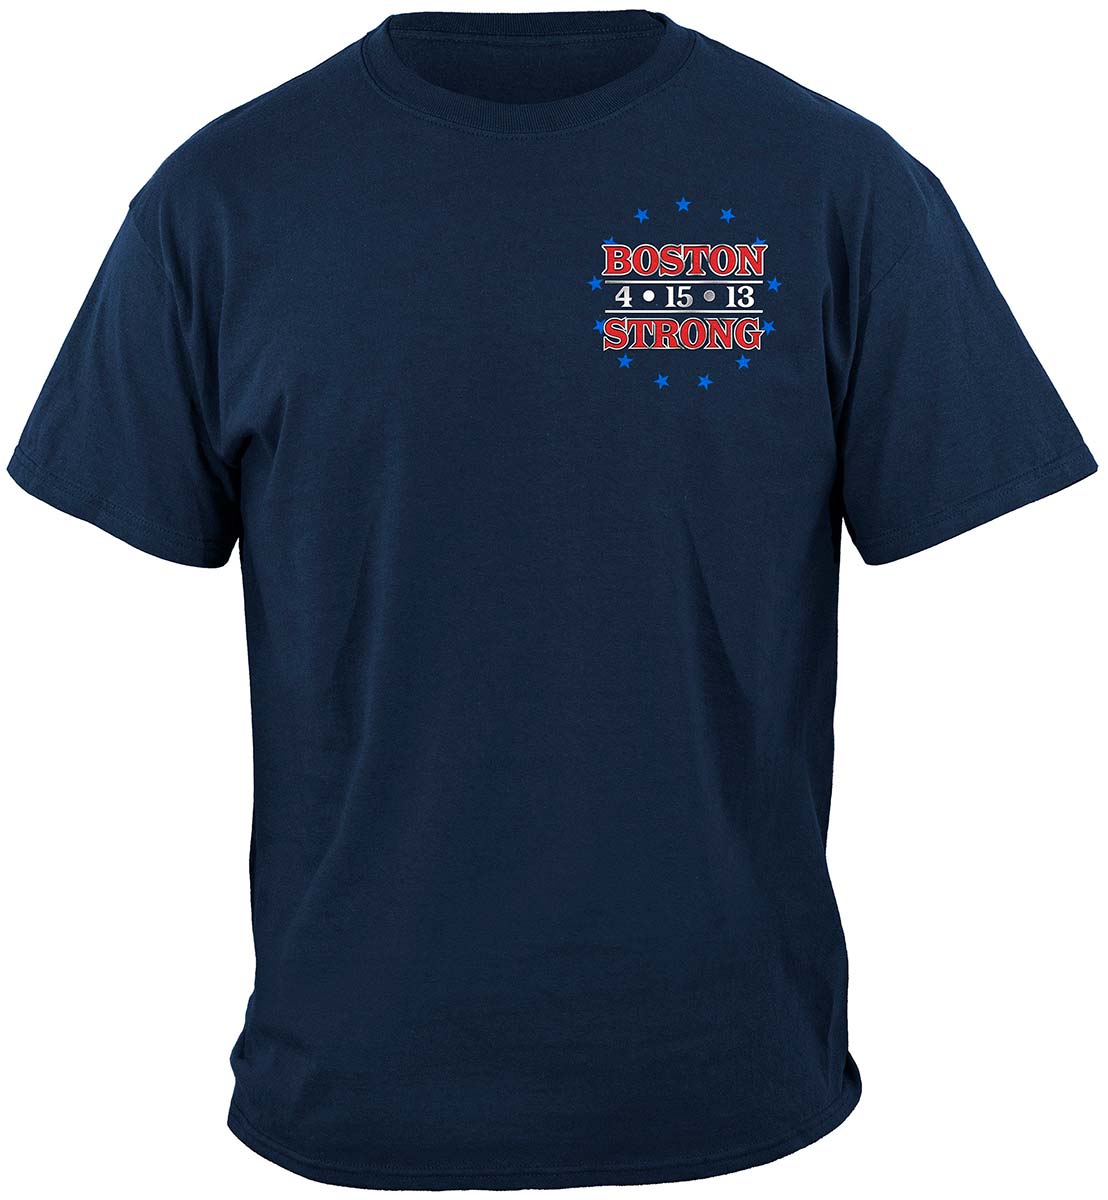 United We Stand Boston Strong Premium Long Sleeves